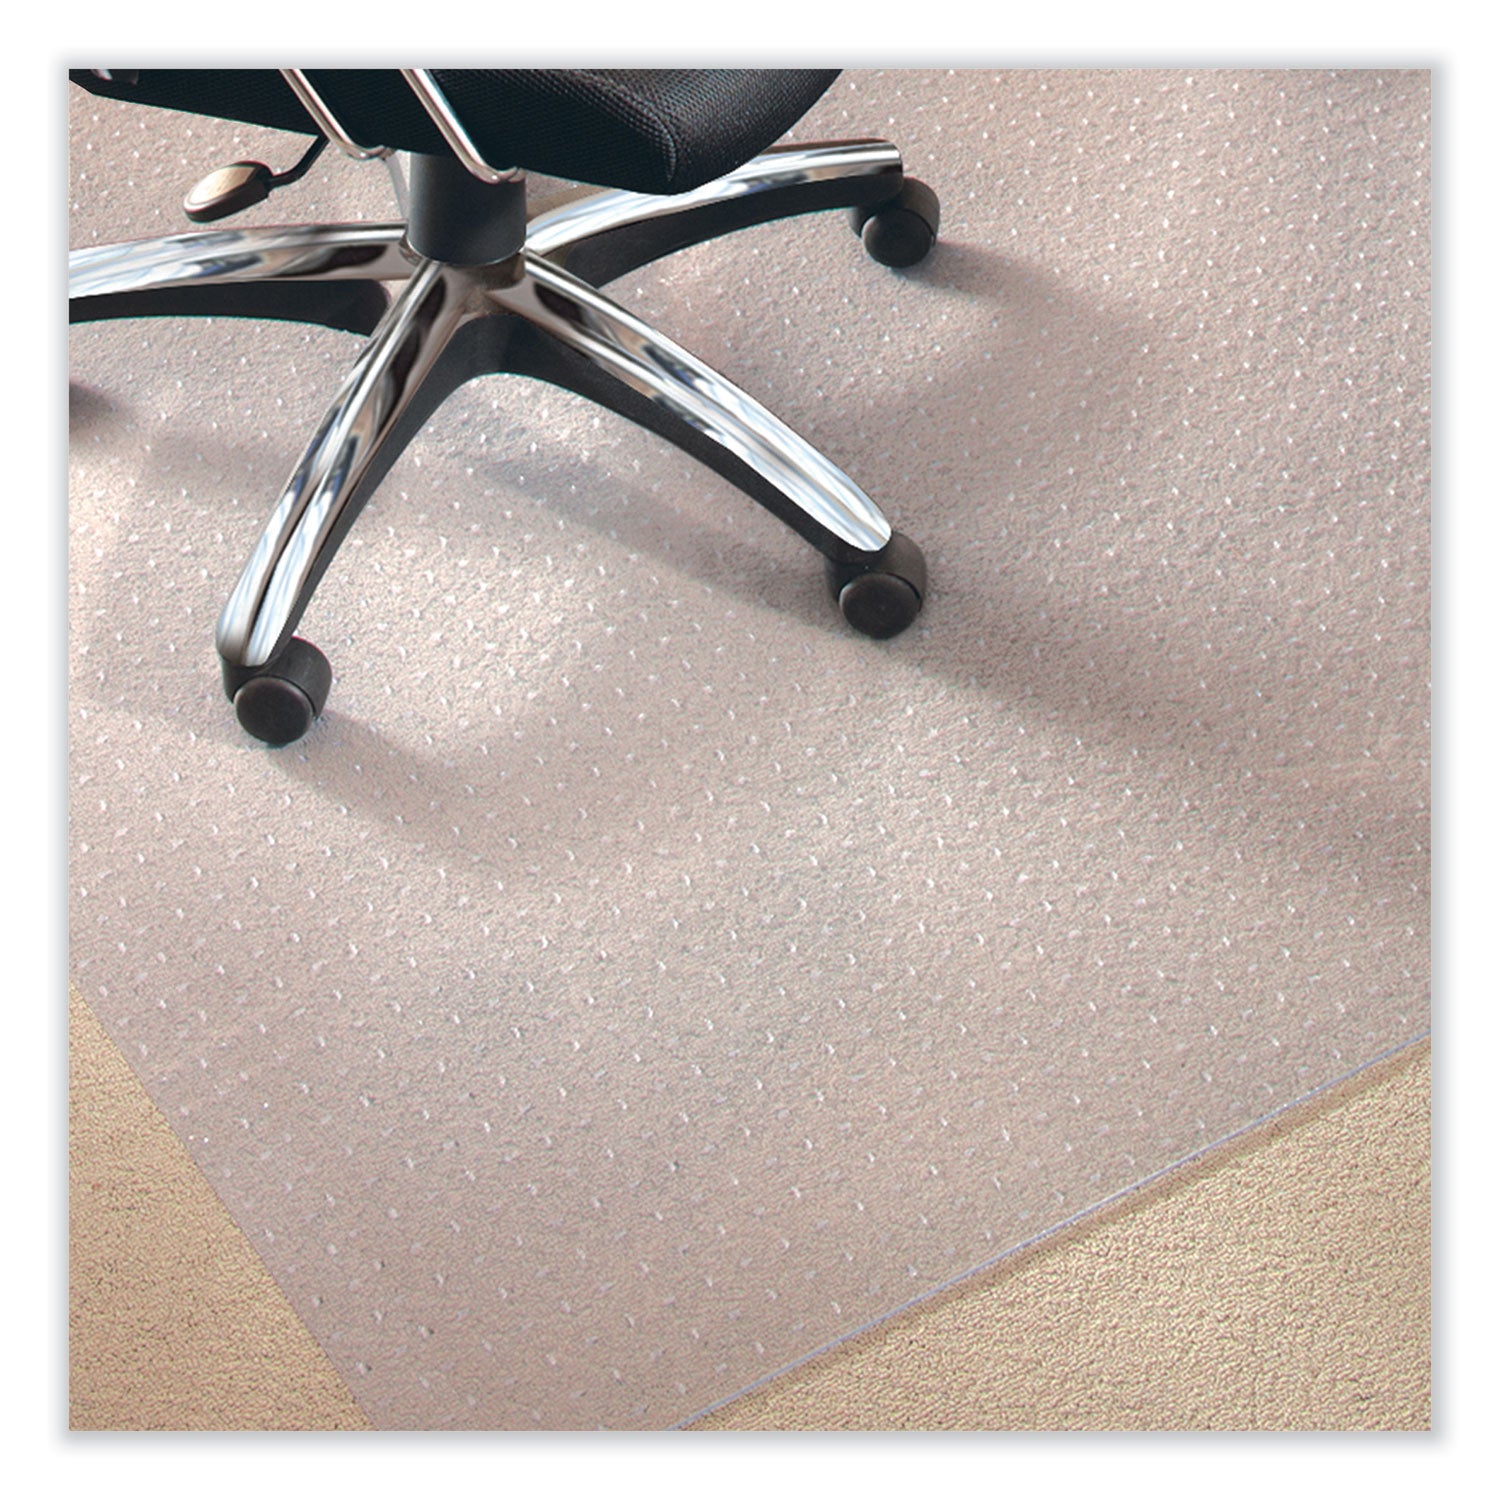 everlife-chair-mat-for-medium-pile-carpet-60-x-96-clear-ships-in-4-6-business-days_esr122881 - 6